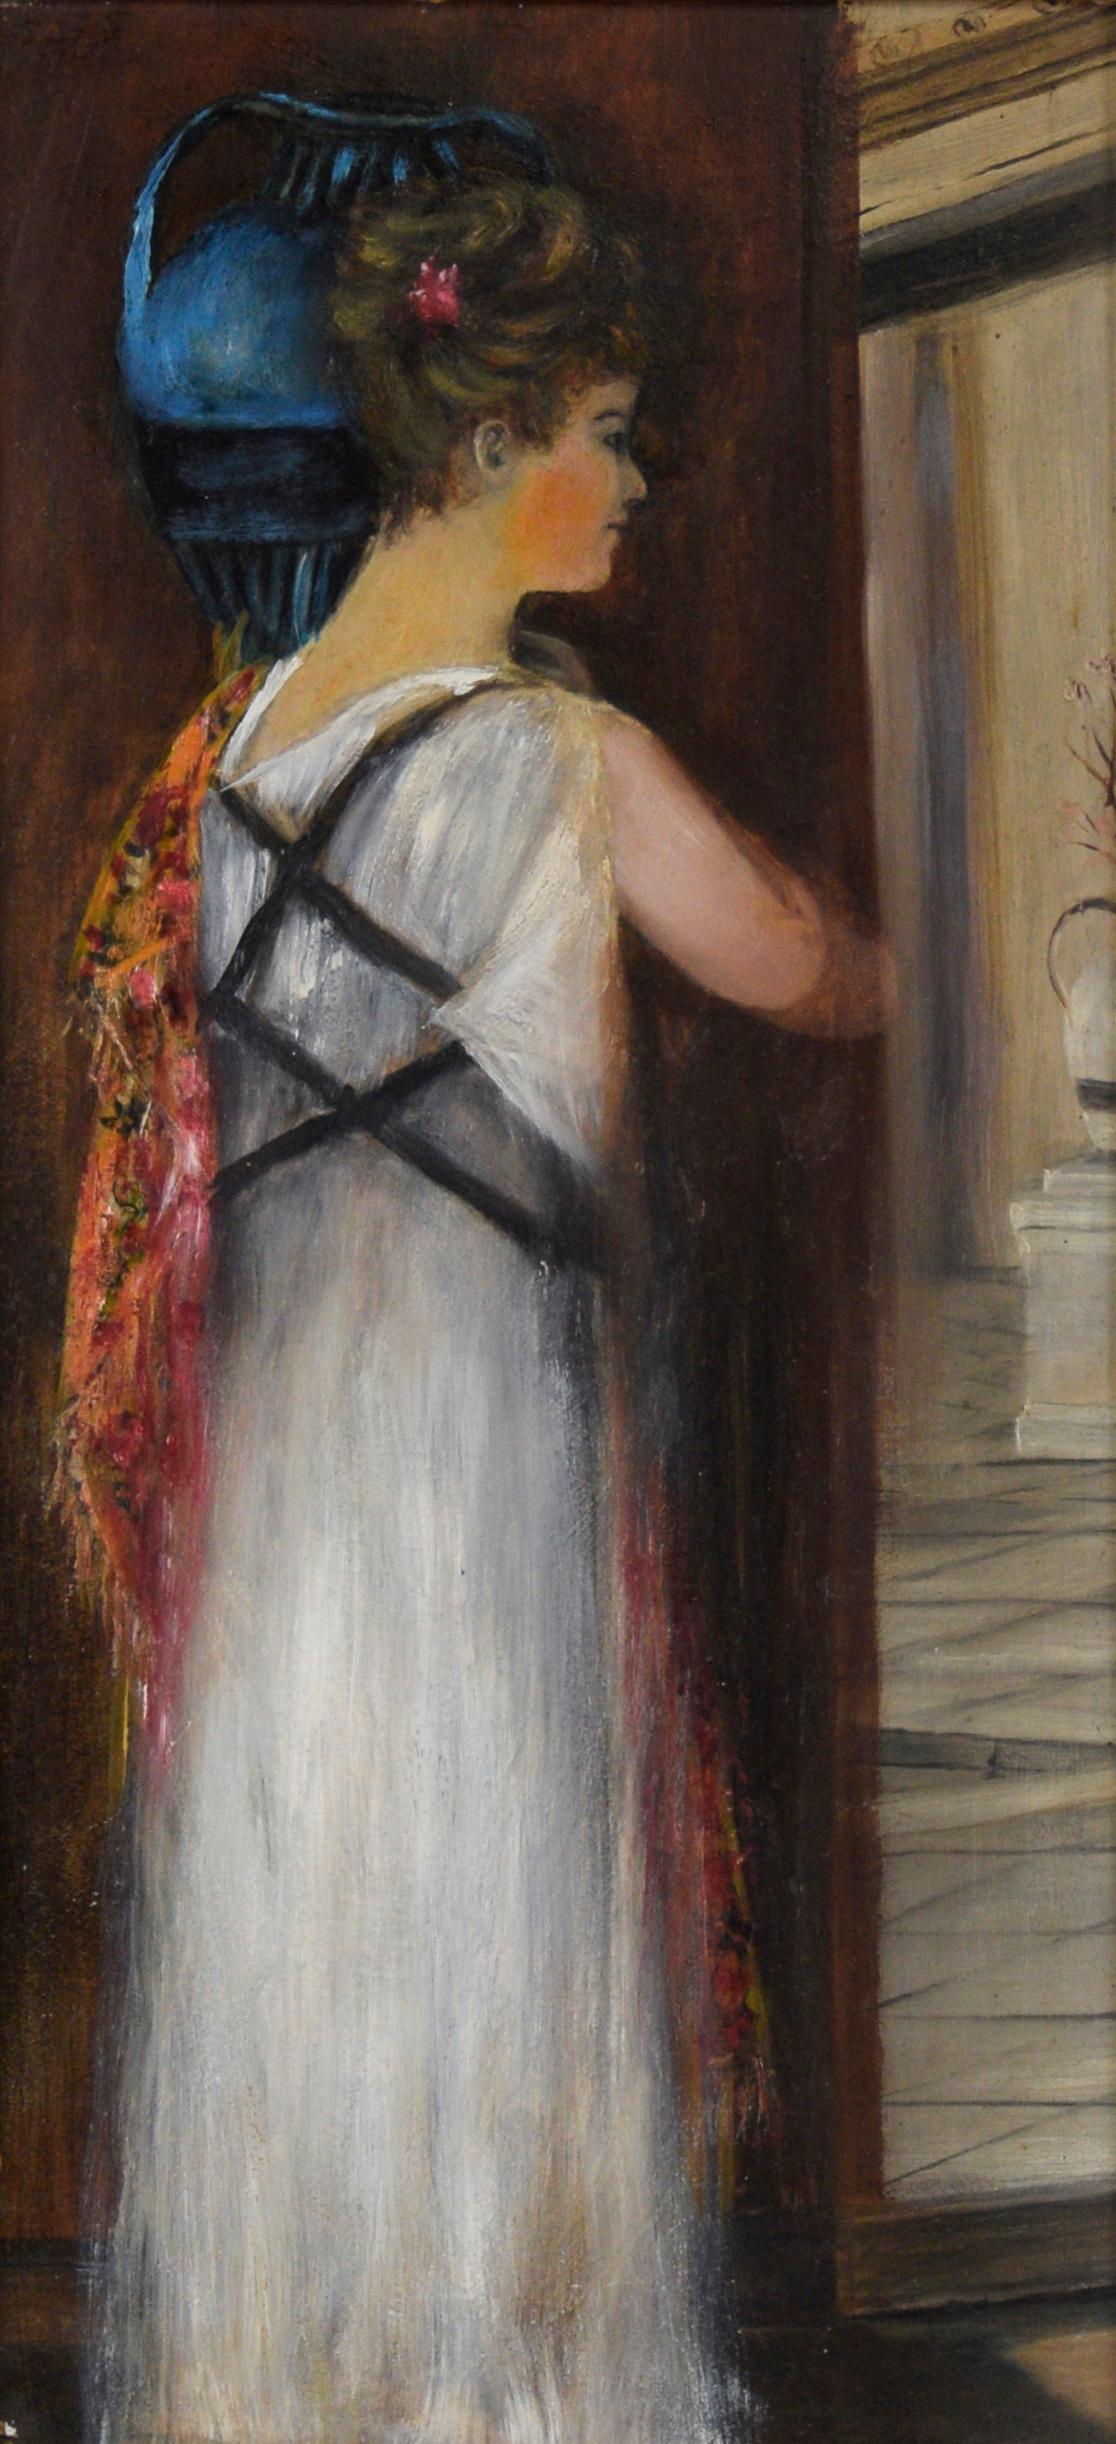 Athenian Woman Carrying a Water Jar In a White Dress
Beautiful painting by a Central California artist circa 1890s (American 19th c). Oil painting of a Athenian woman holding a blue water vase on her shoulder with a red and orange shawl draped over